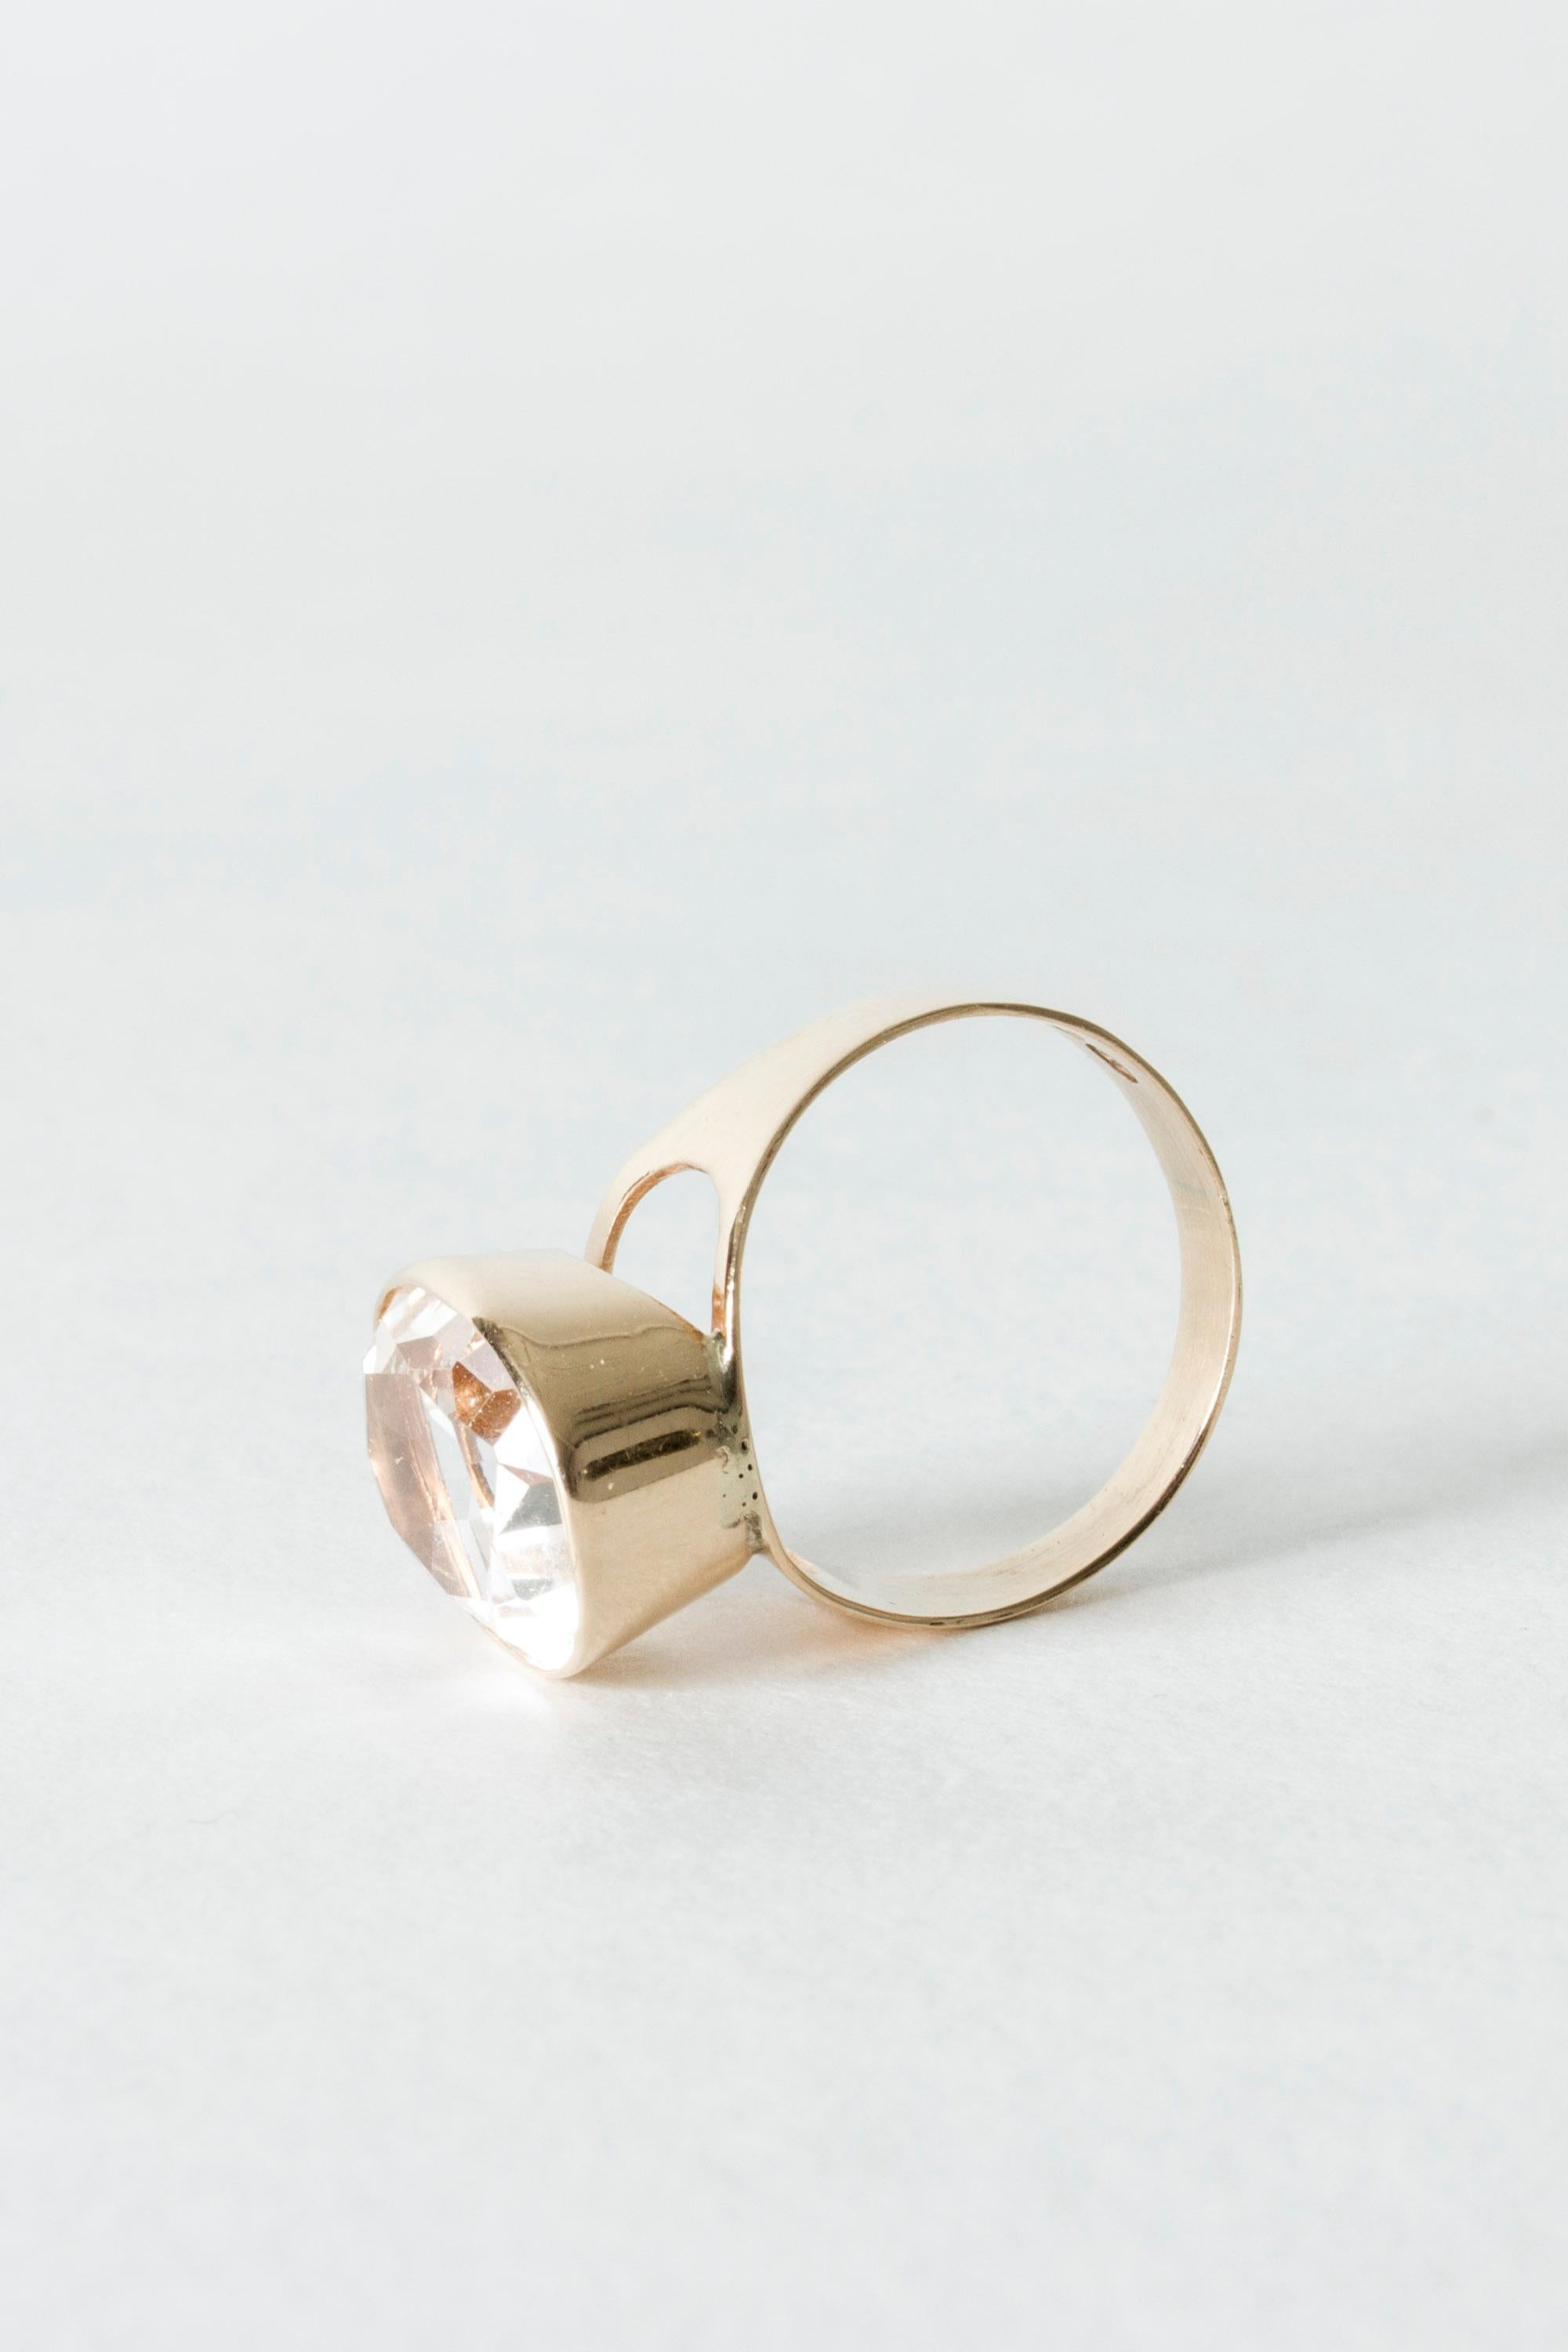 Gold and Rock Crystal Ring by Tauno Shone, Finland, 1969 1